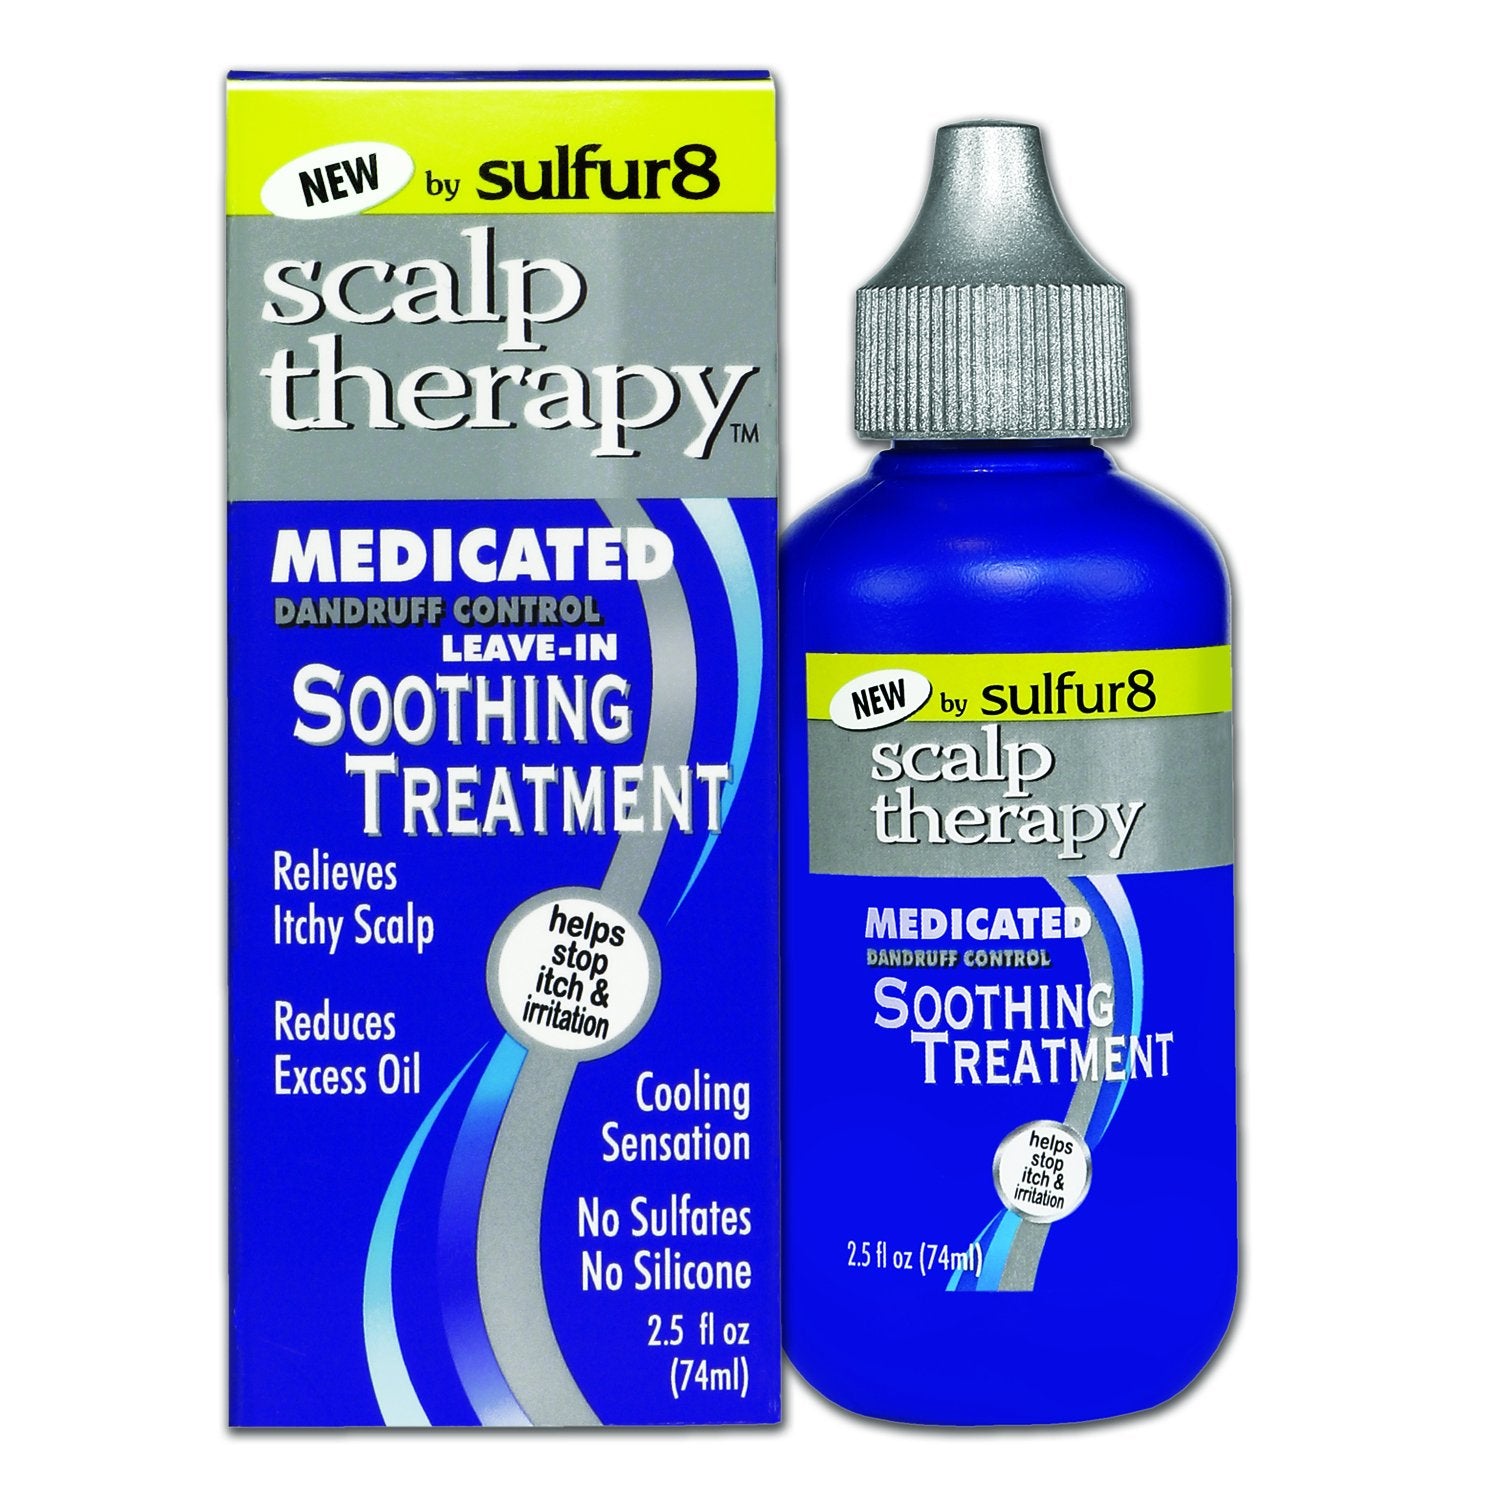 Sulfur 8 Scalp Therapy Medicated Leave-In 2.5 Oz